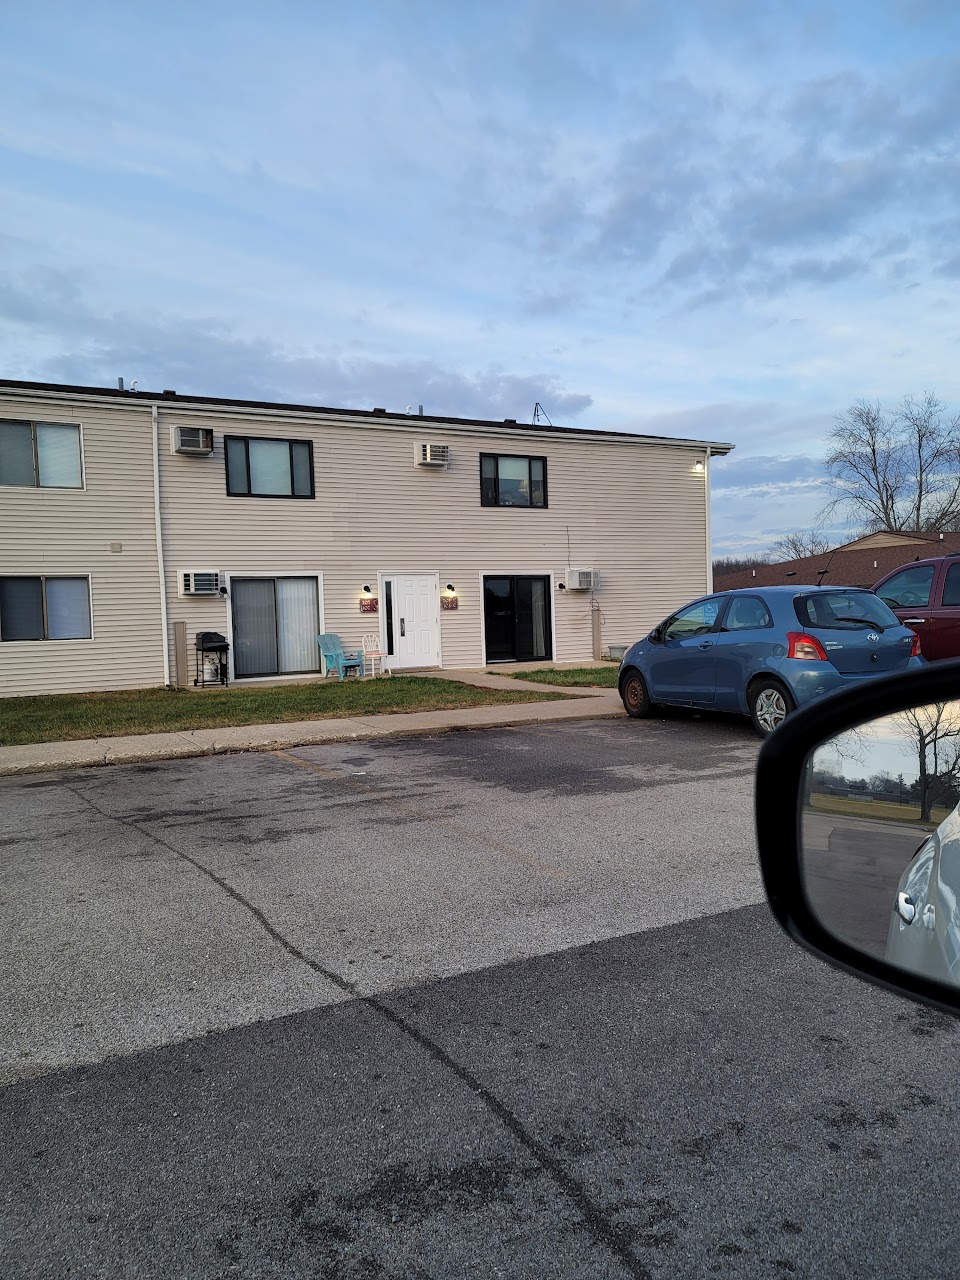 Photo of VILLAGE SQUARE ELDERLY III. Affordable housing located at 1628 E MYRTLE ST CANTON, IL 61520